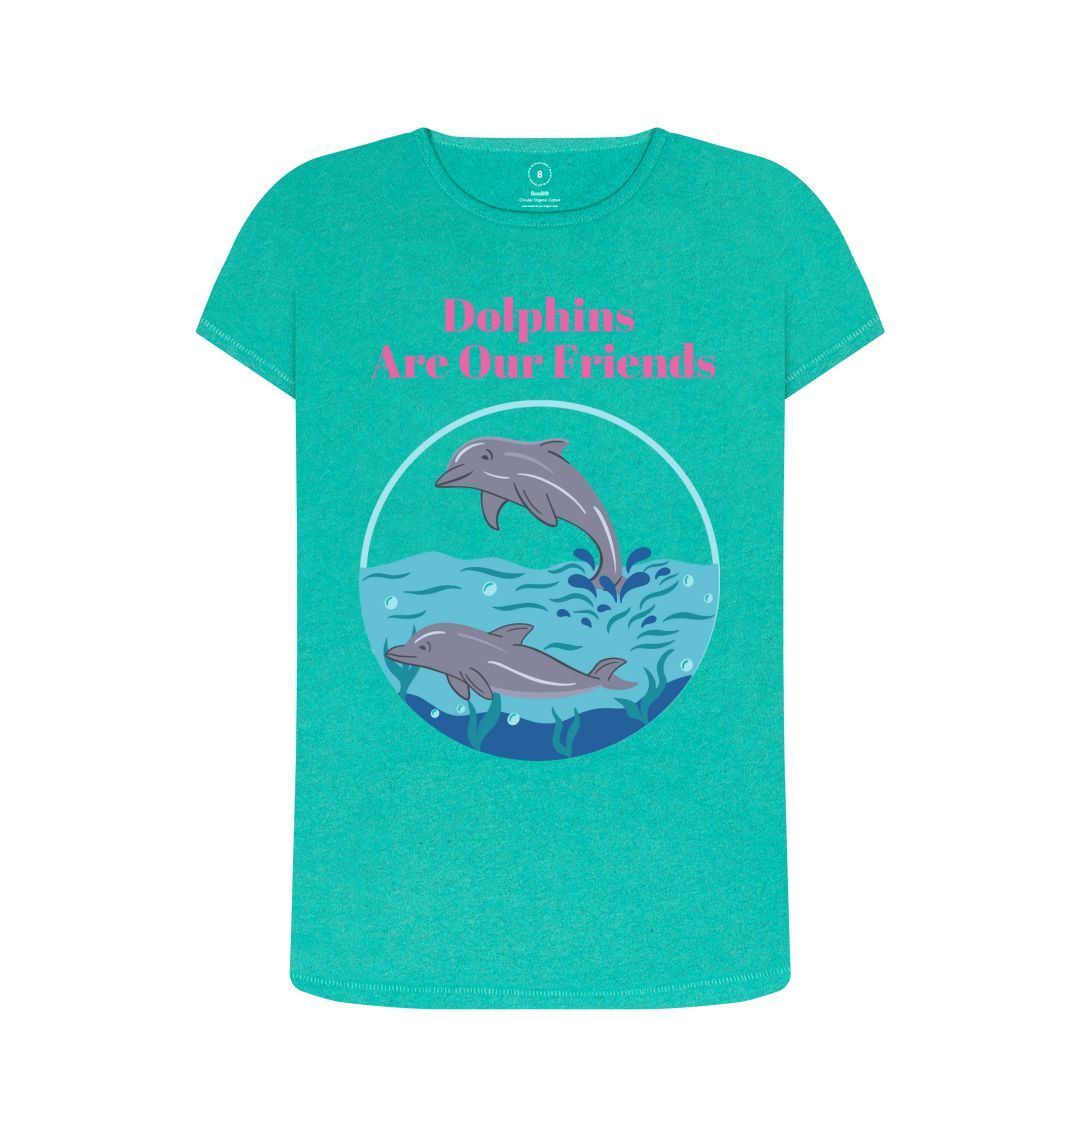 Seagrass Green Women's Sustainable T-Shirt - Dolphins Are Our Friends: Protecting Ocean Harmony